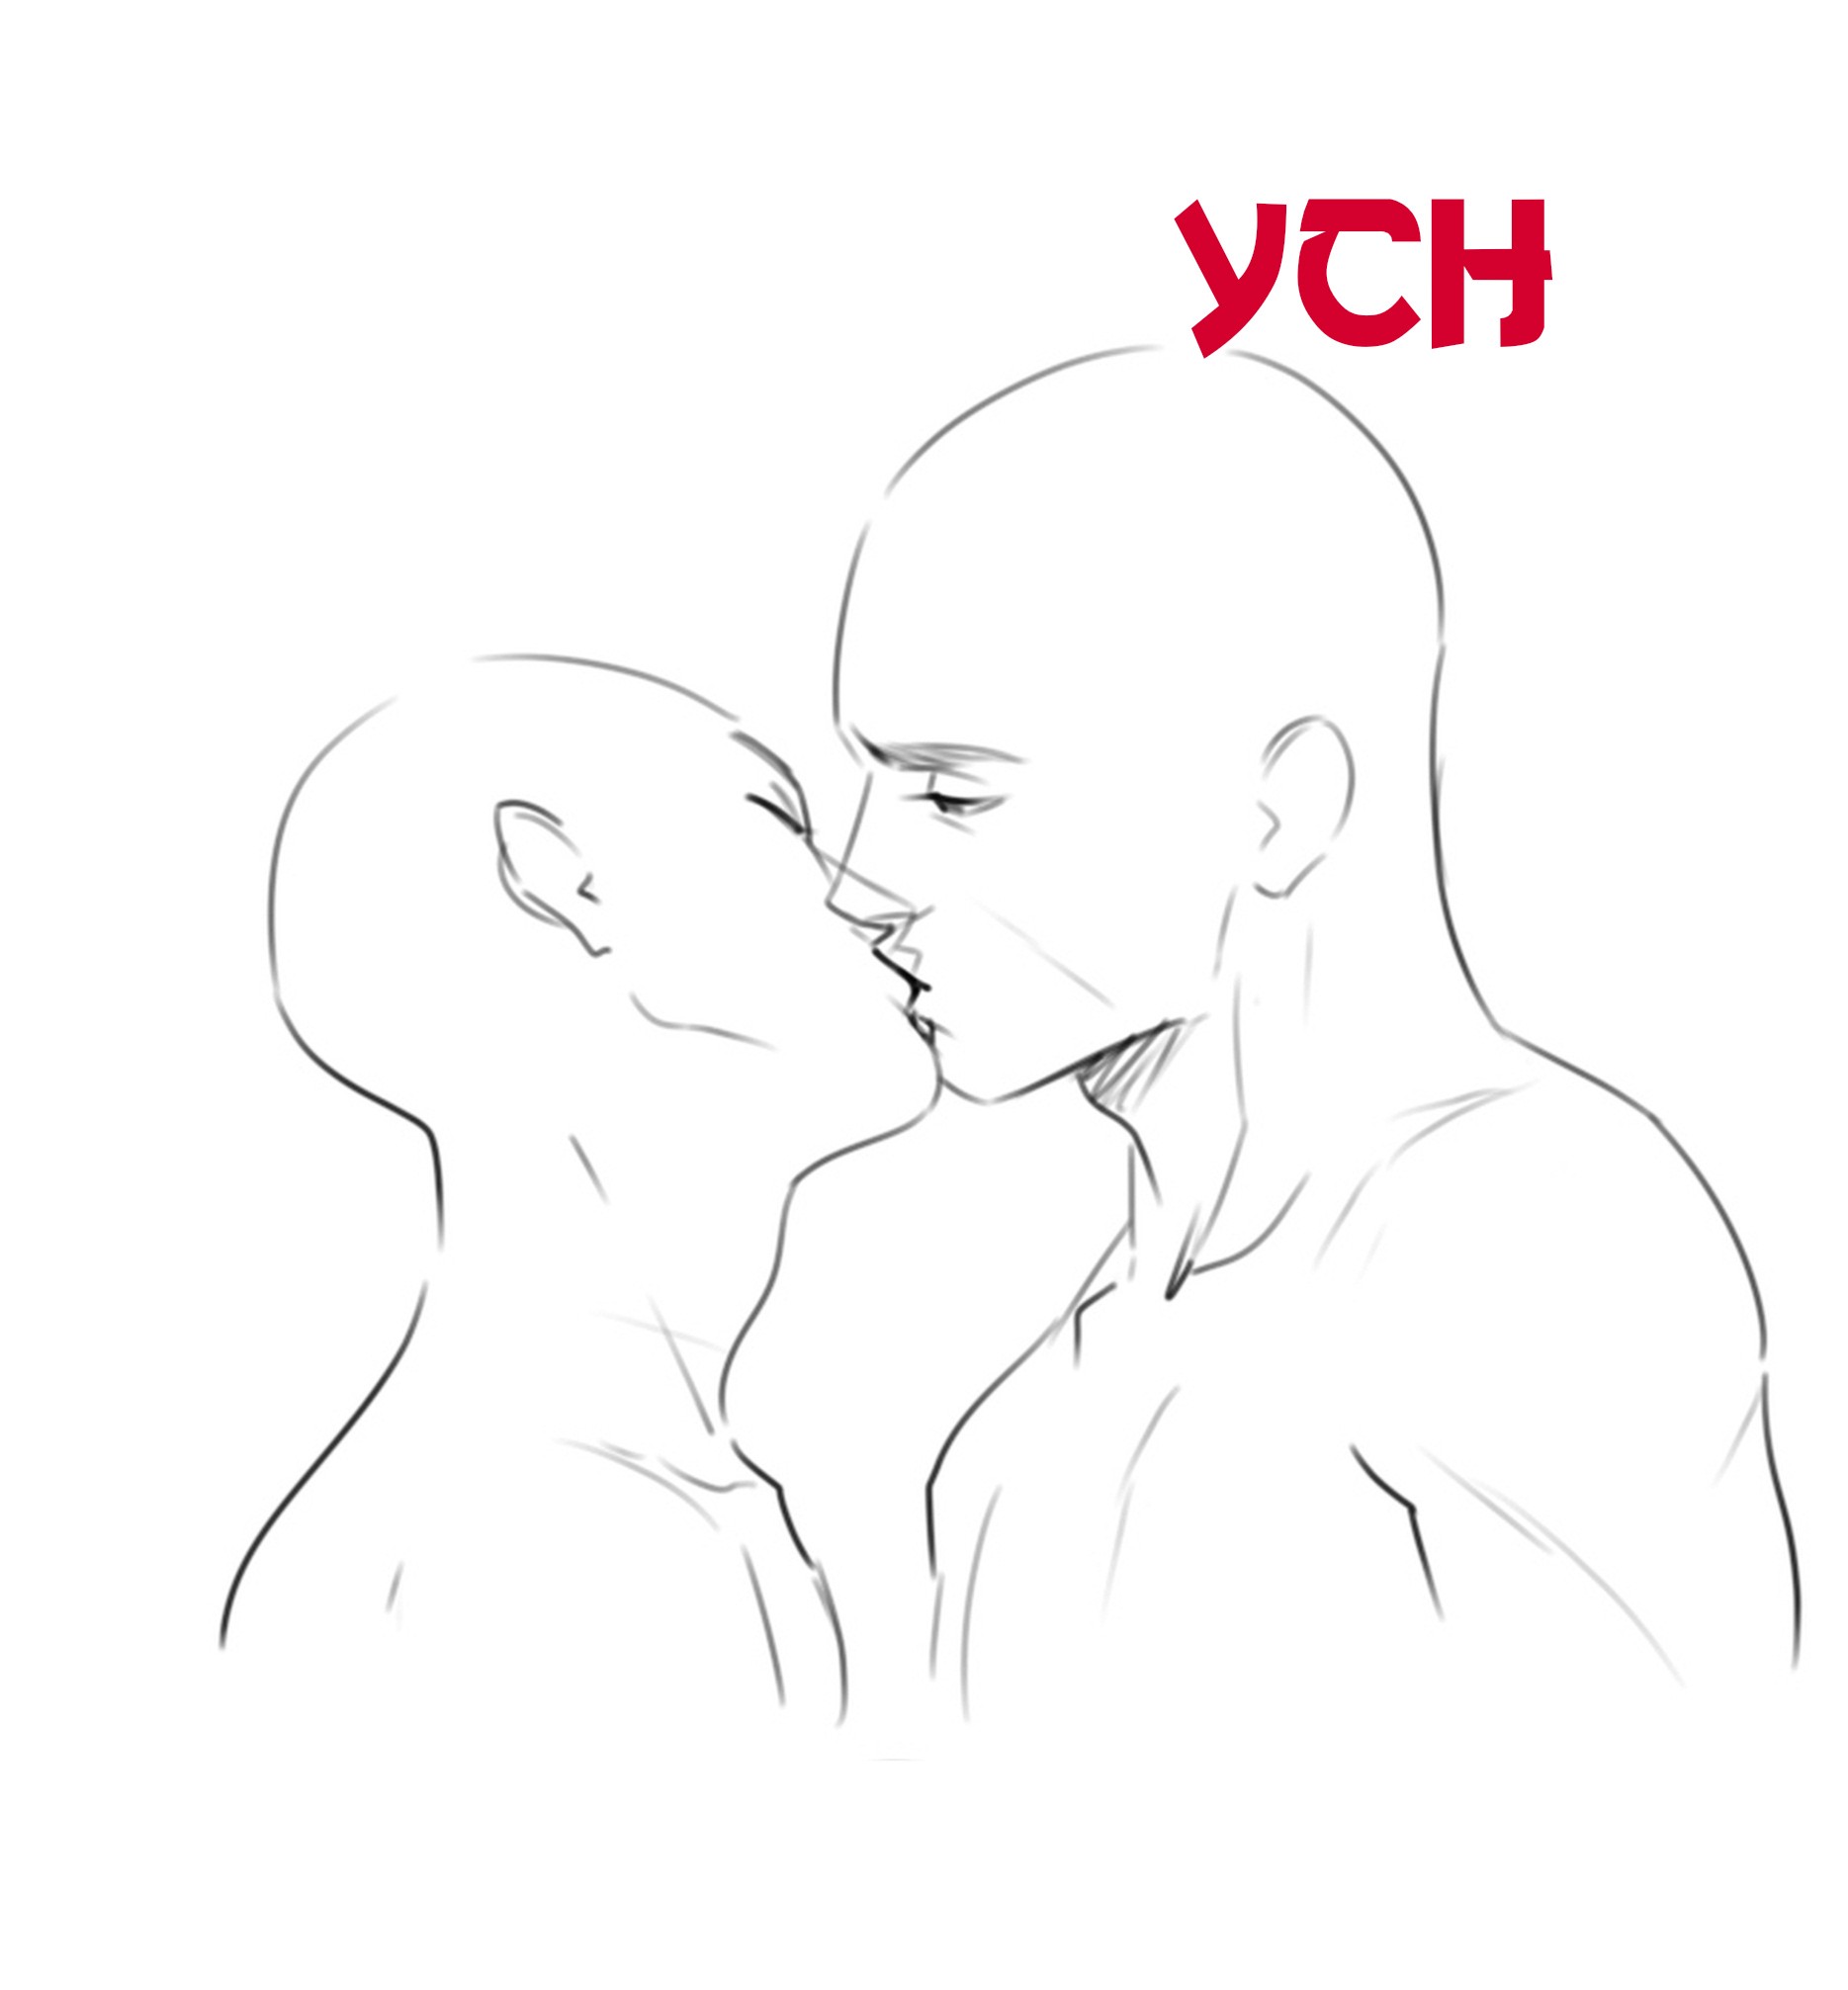 Ych - YCH.Commishes.